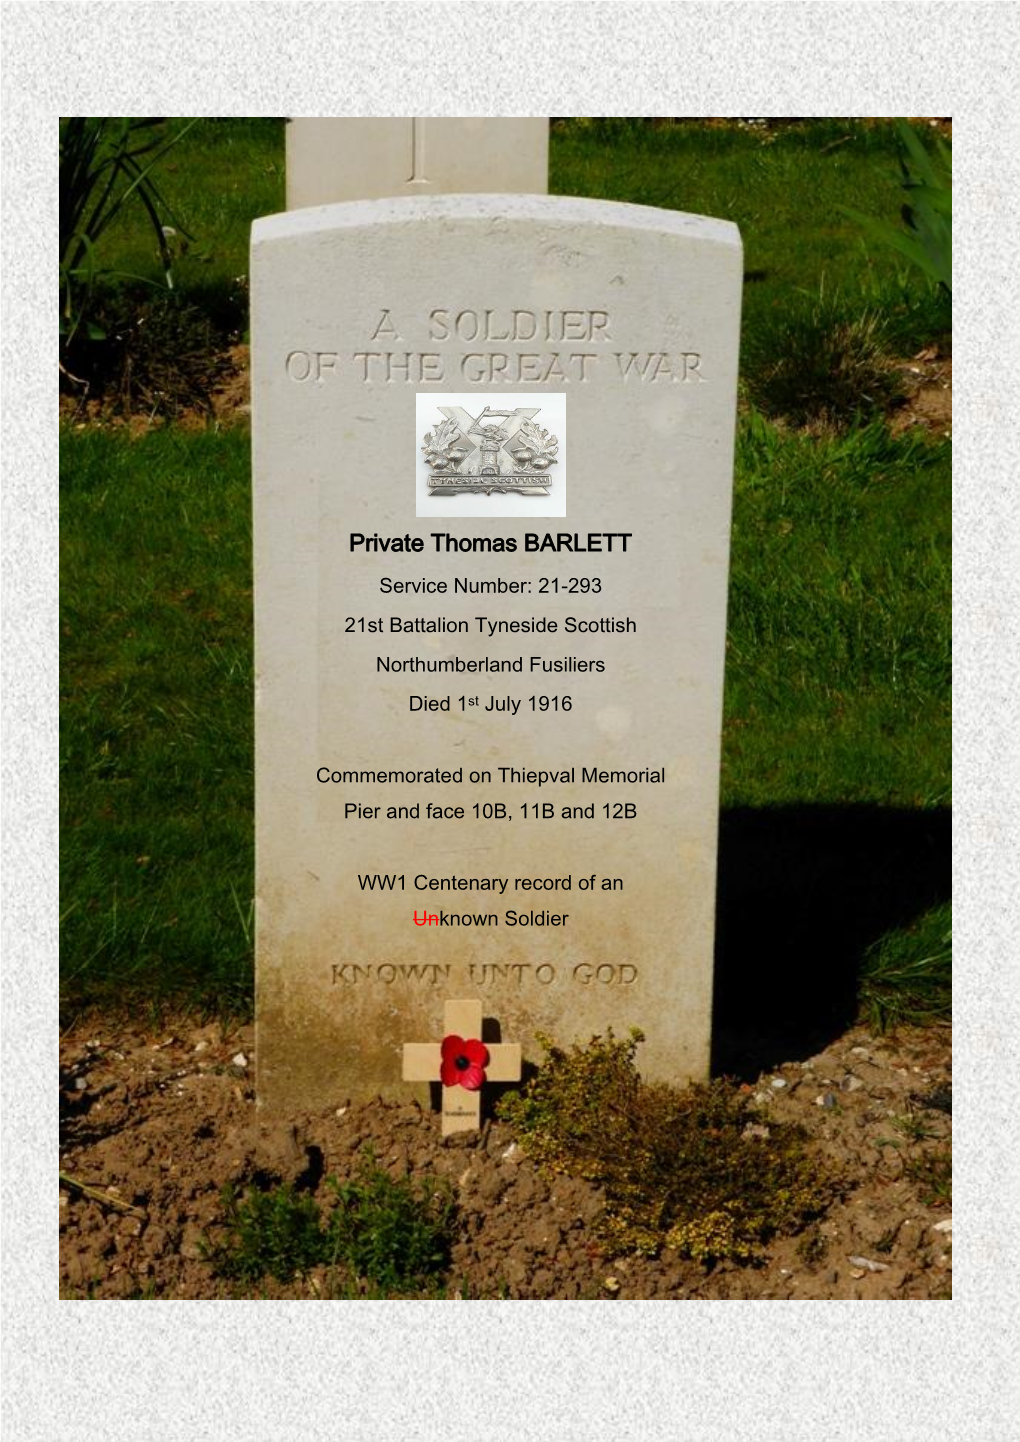 Private Thomas BARLETT Service Number: 21-293 21St Battalion Tyneside Scottish Northumberland Fusiliers Died 1St July 1916